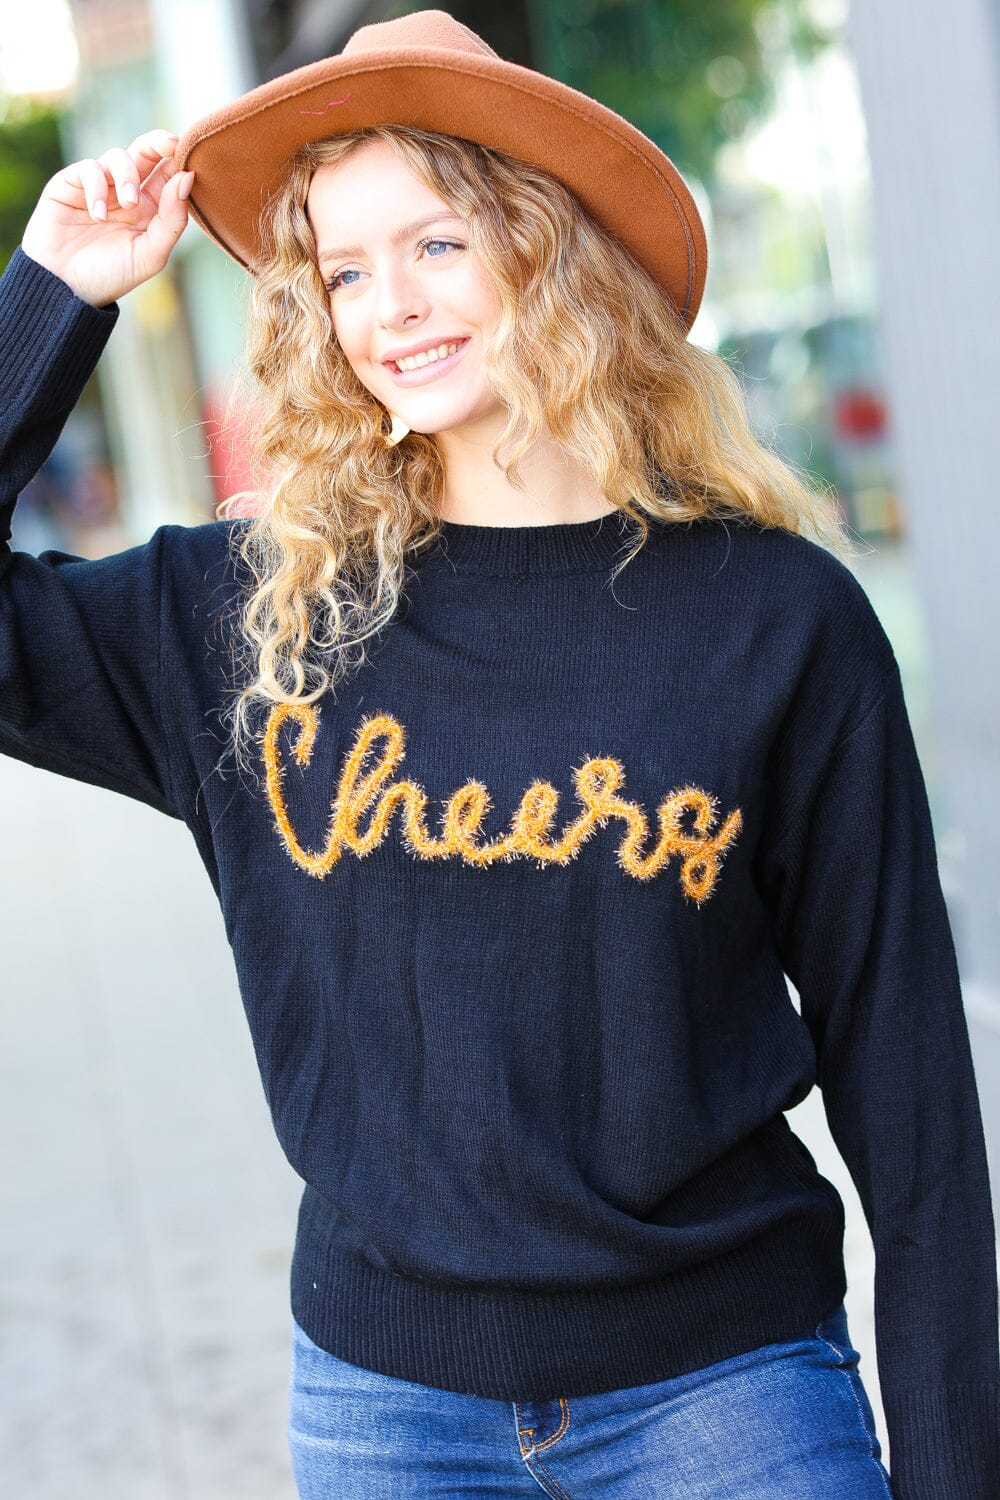 Take Note Black Embroidery "Cheers" Oversized Knit Top Haptics 